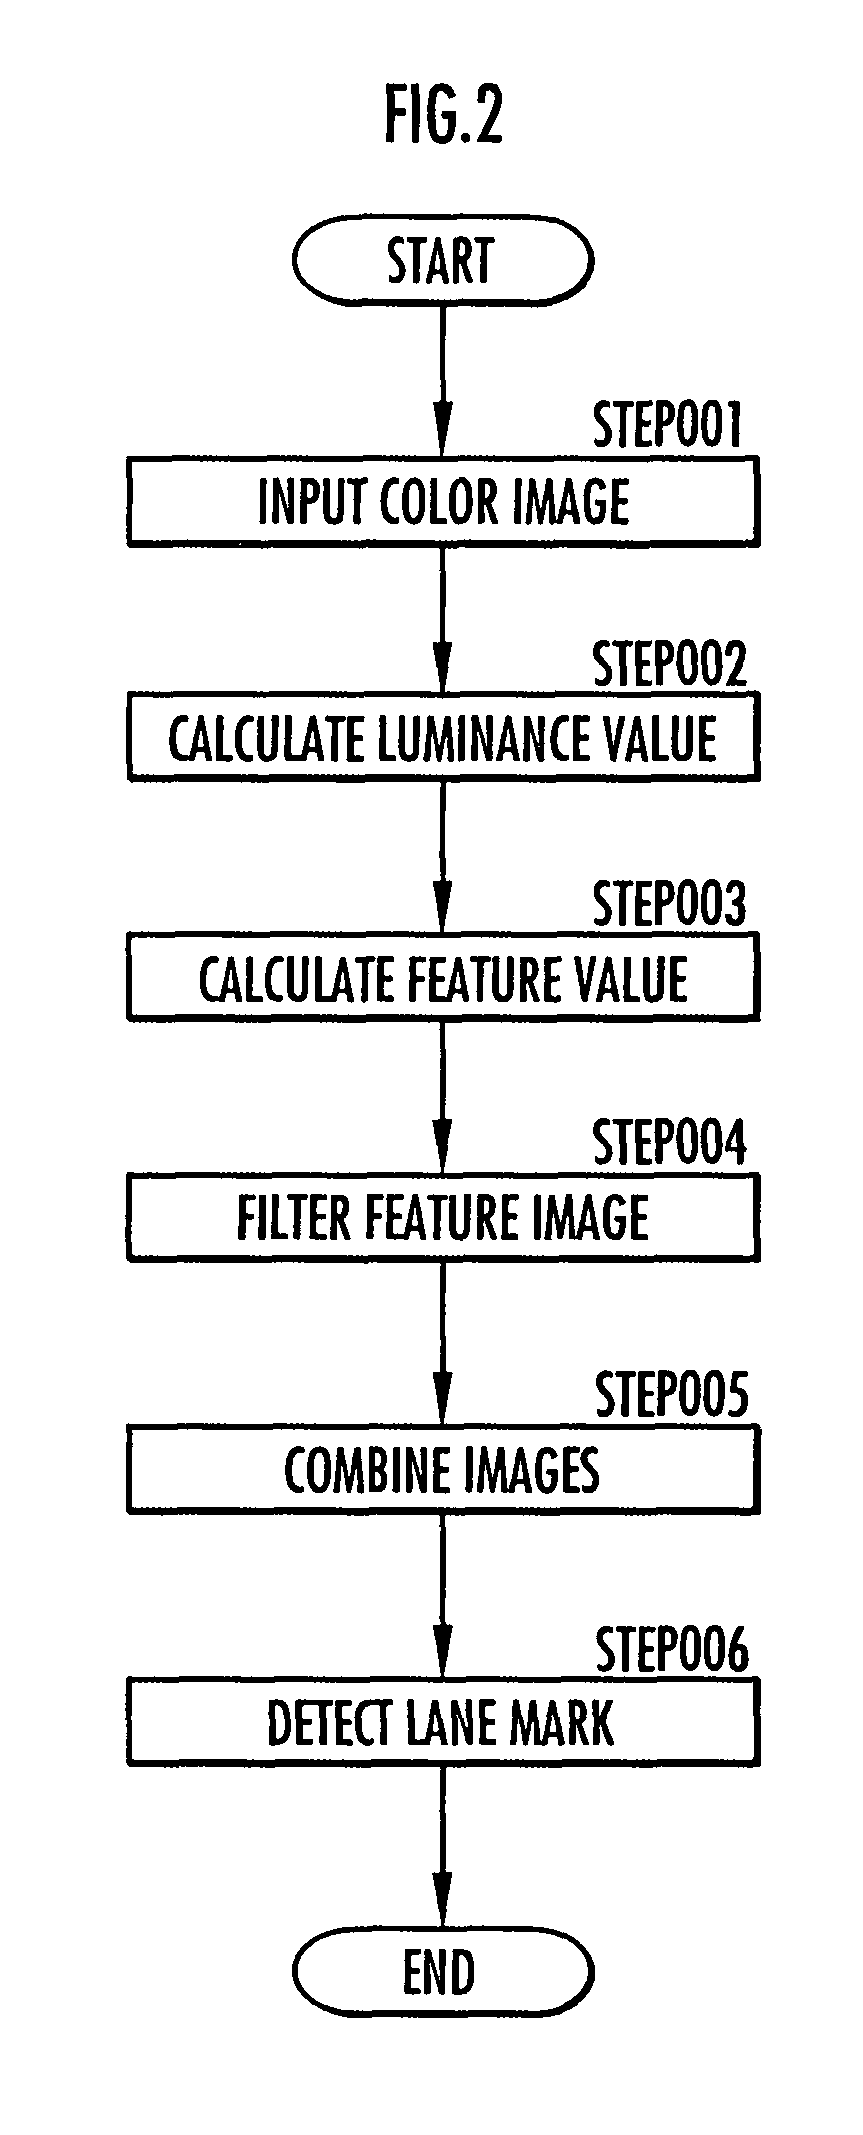 Vehicle and road sign recognition device